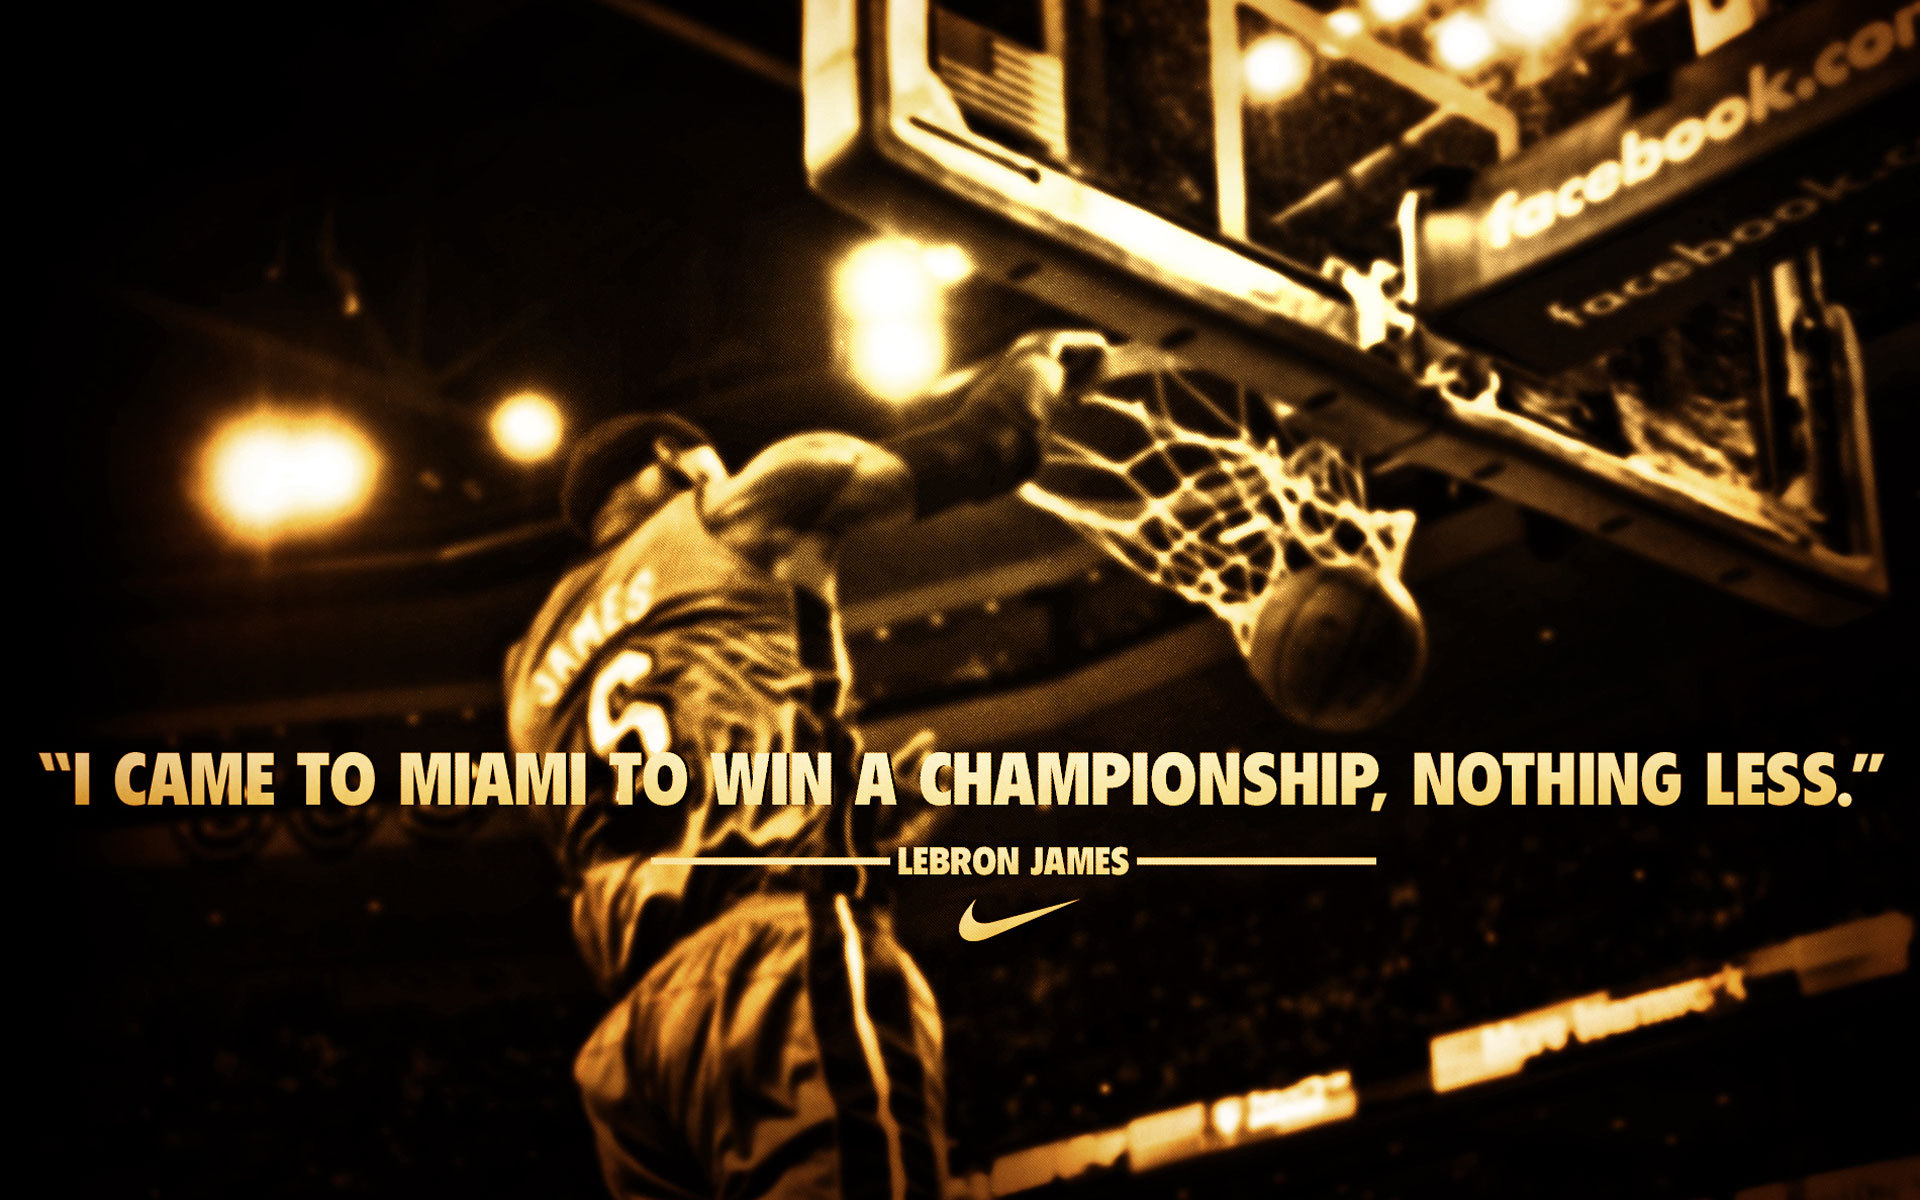 Lebron James in Nike wallpapers and images - wallpapers, pictures ...